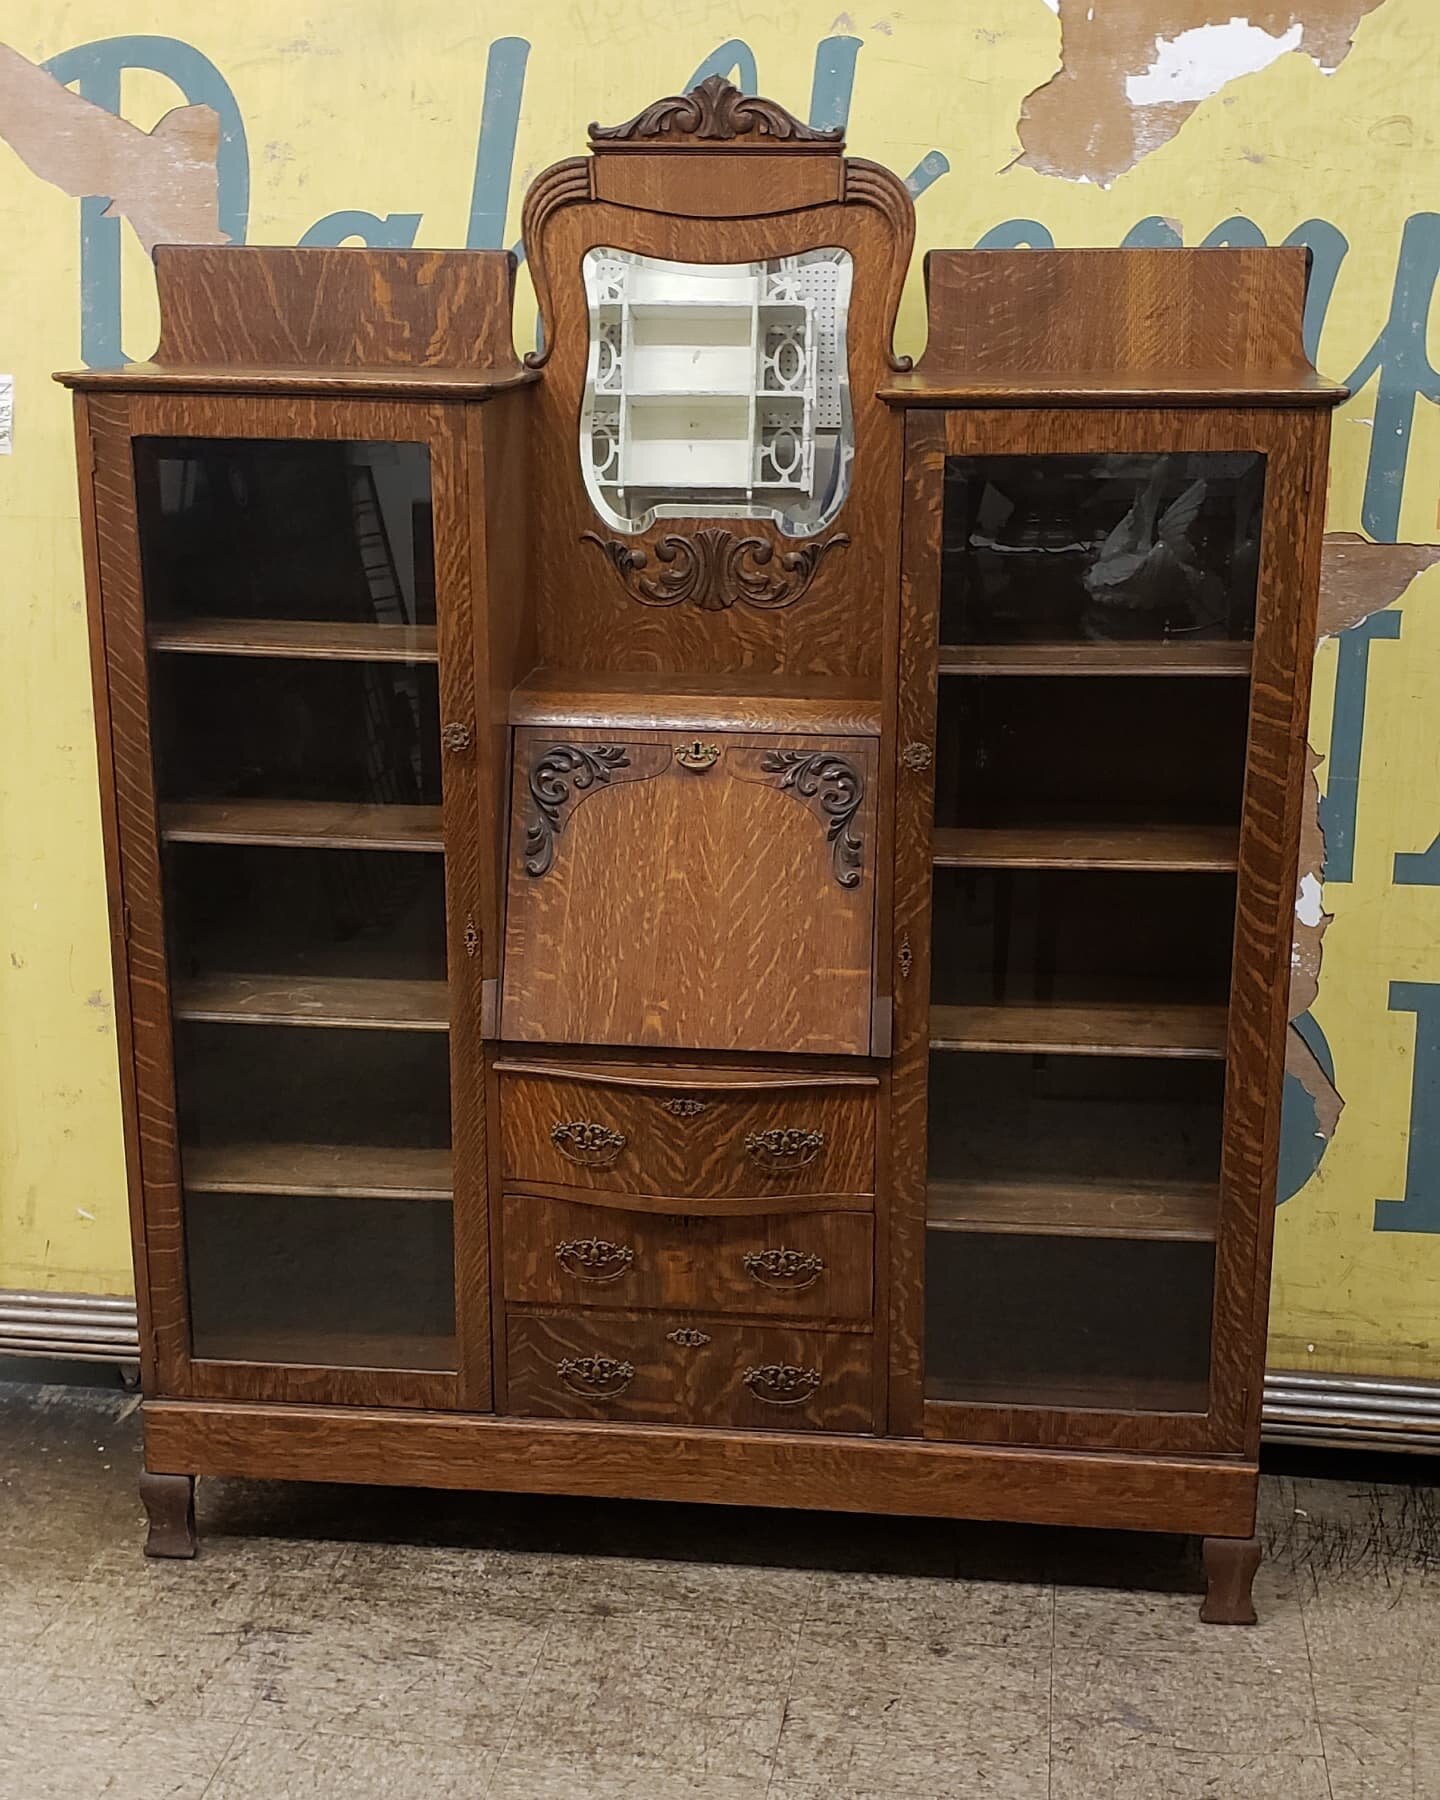 $275. Antique secretary desk mirrored vanity China cabinet hutch with beveled glass doors. Quarter sawn tiger oak. Works great. 72&quot; tall 56.5&quot; wide 14&quot; deep. 
Plus tax.
This item is located in my Antique Mall booth in the city or Orang